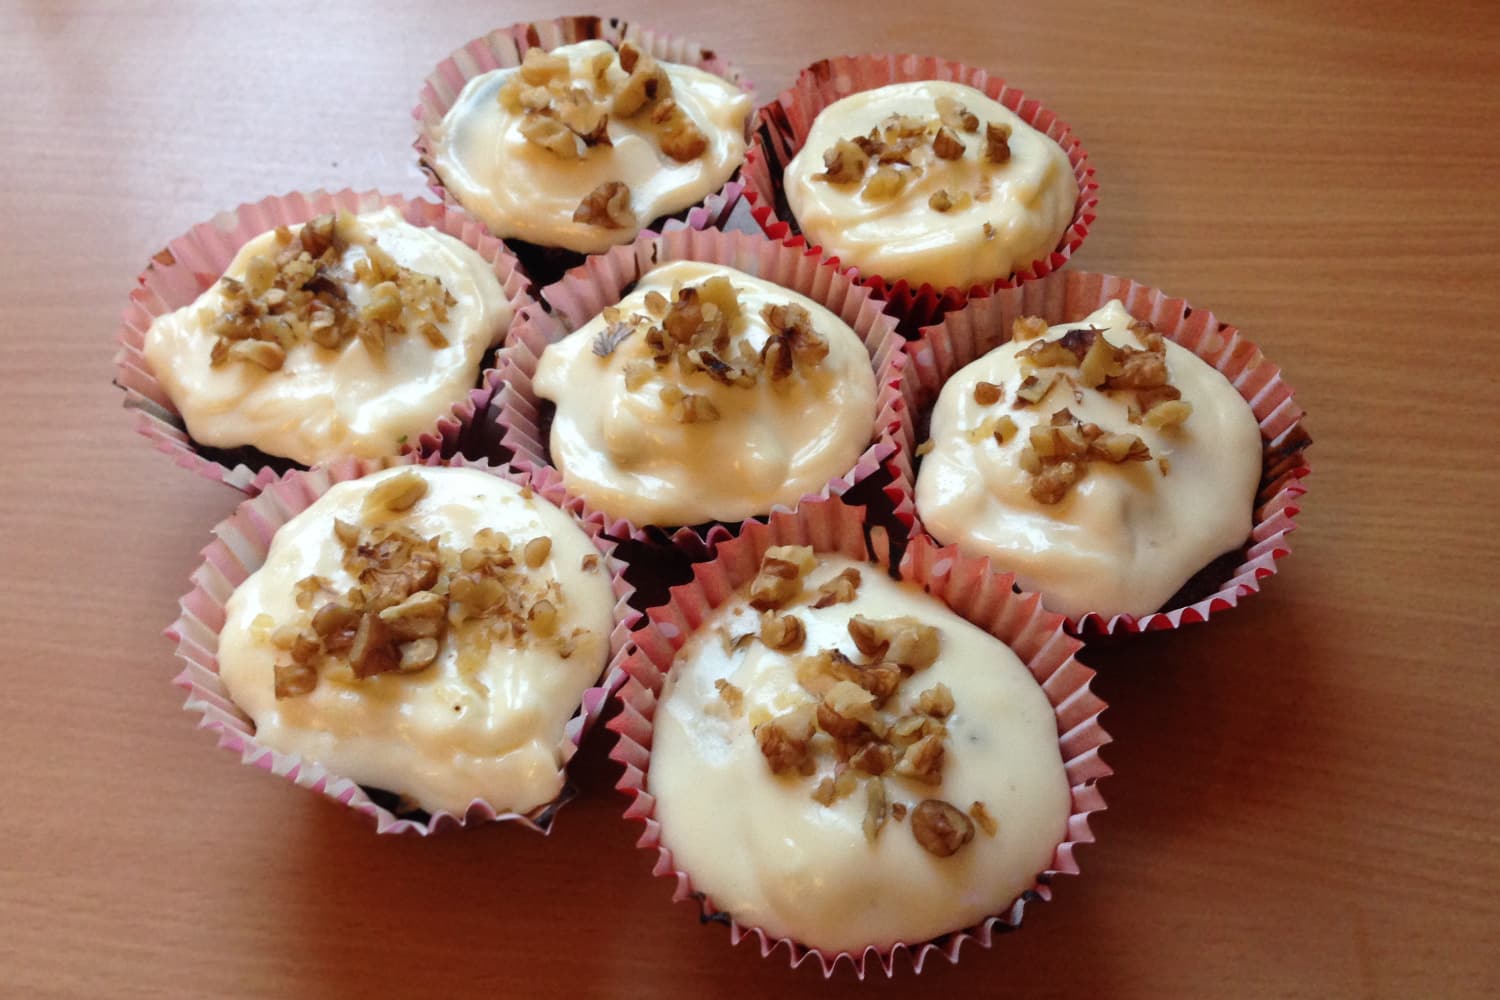 Yummy Carrot Muffins ready to eat